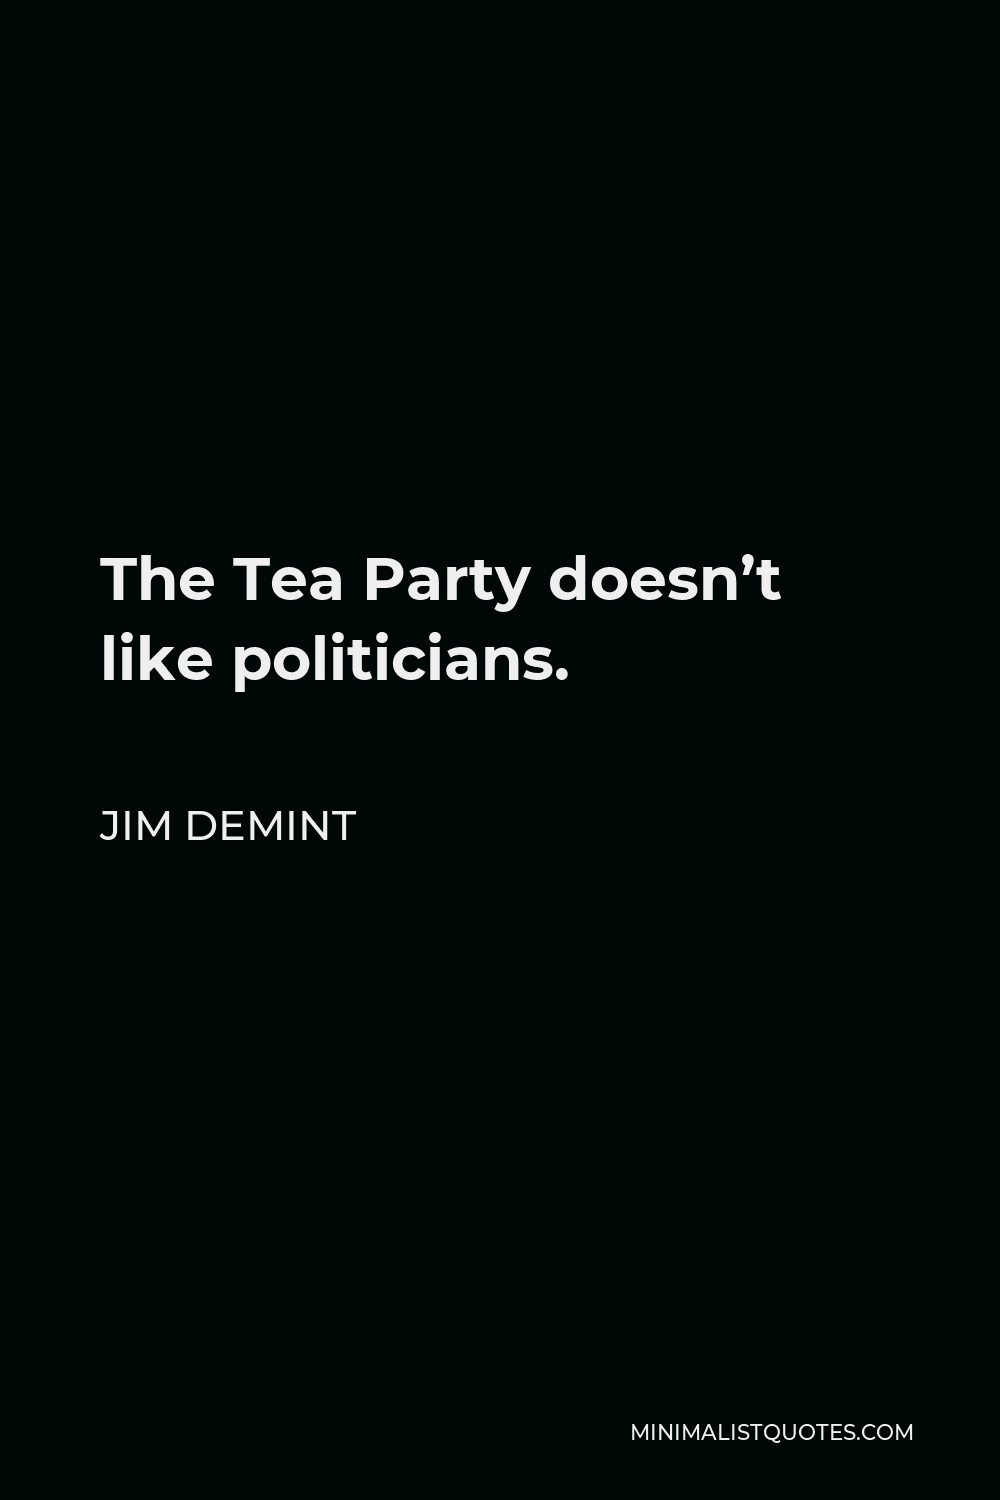 Jim Demint Quote The Tea Party Doesnt Like Politicians 4785